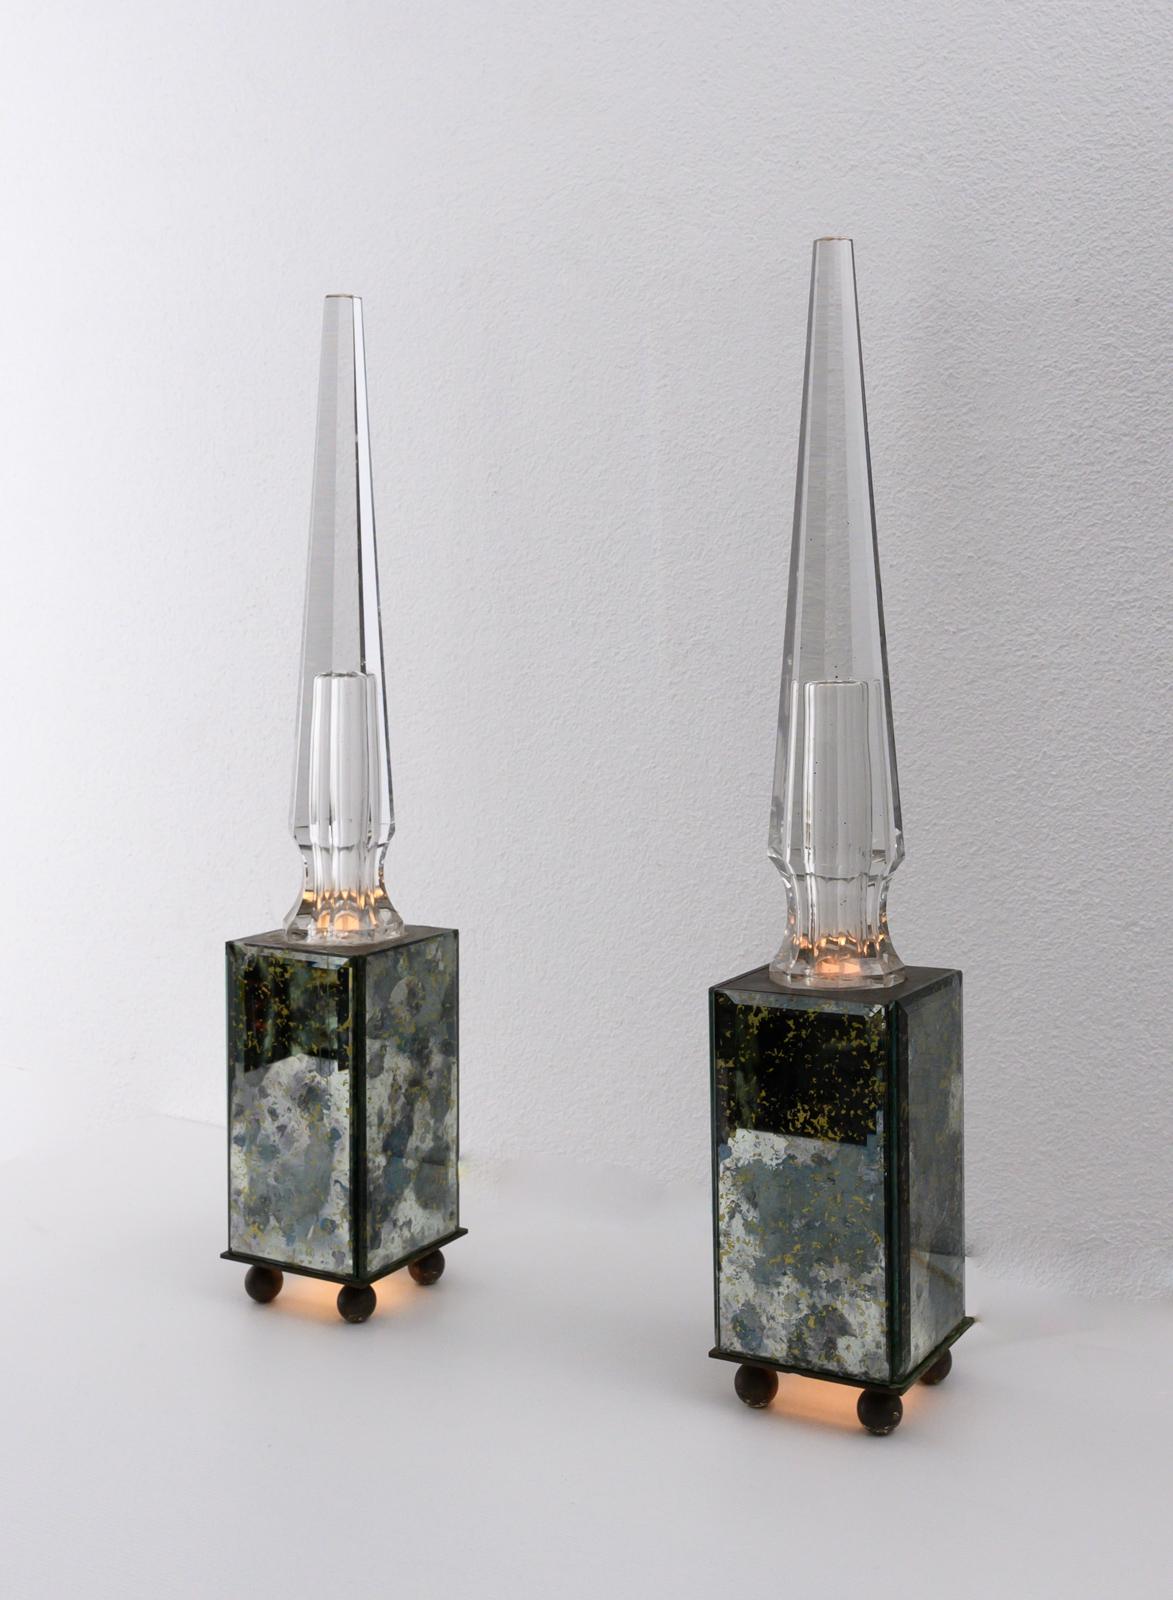 Art Deco Pair of Obelisk Lamps in the Style of Serge Roche, France circa 1940